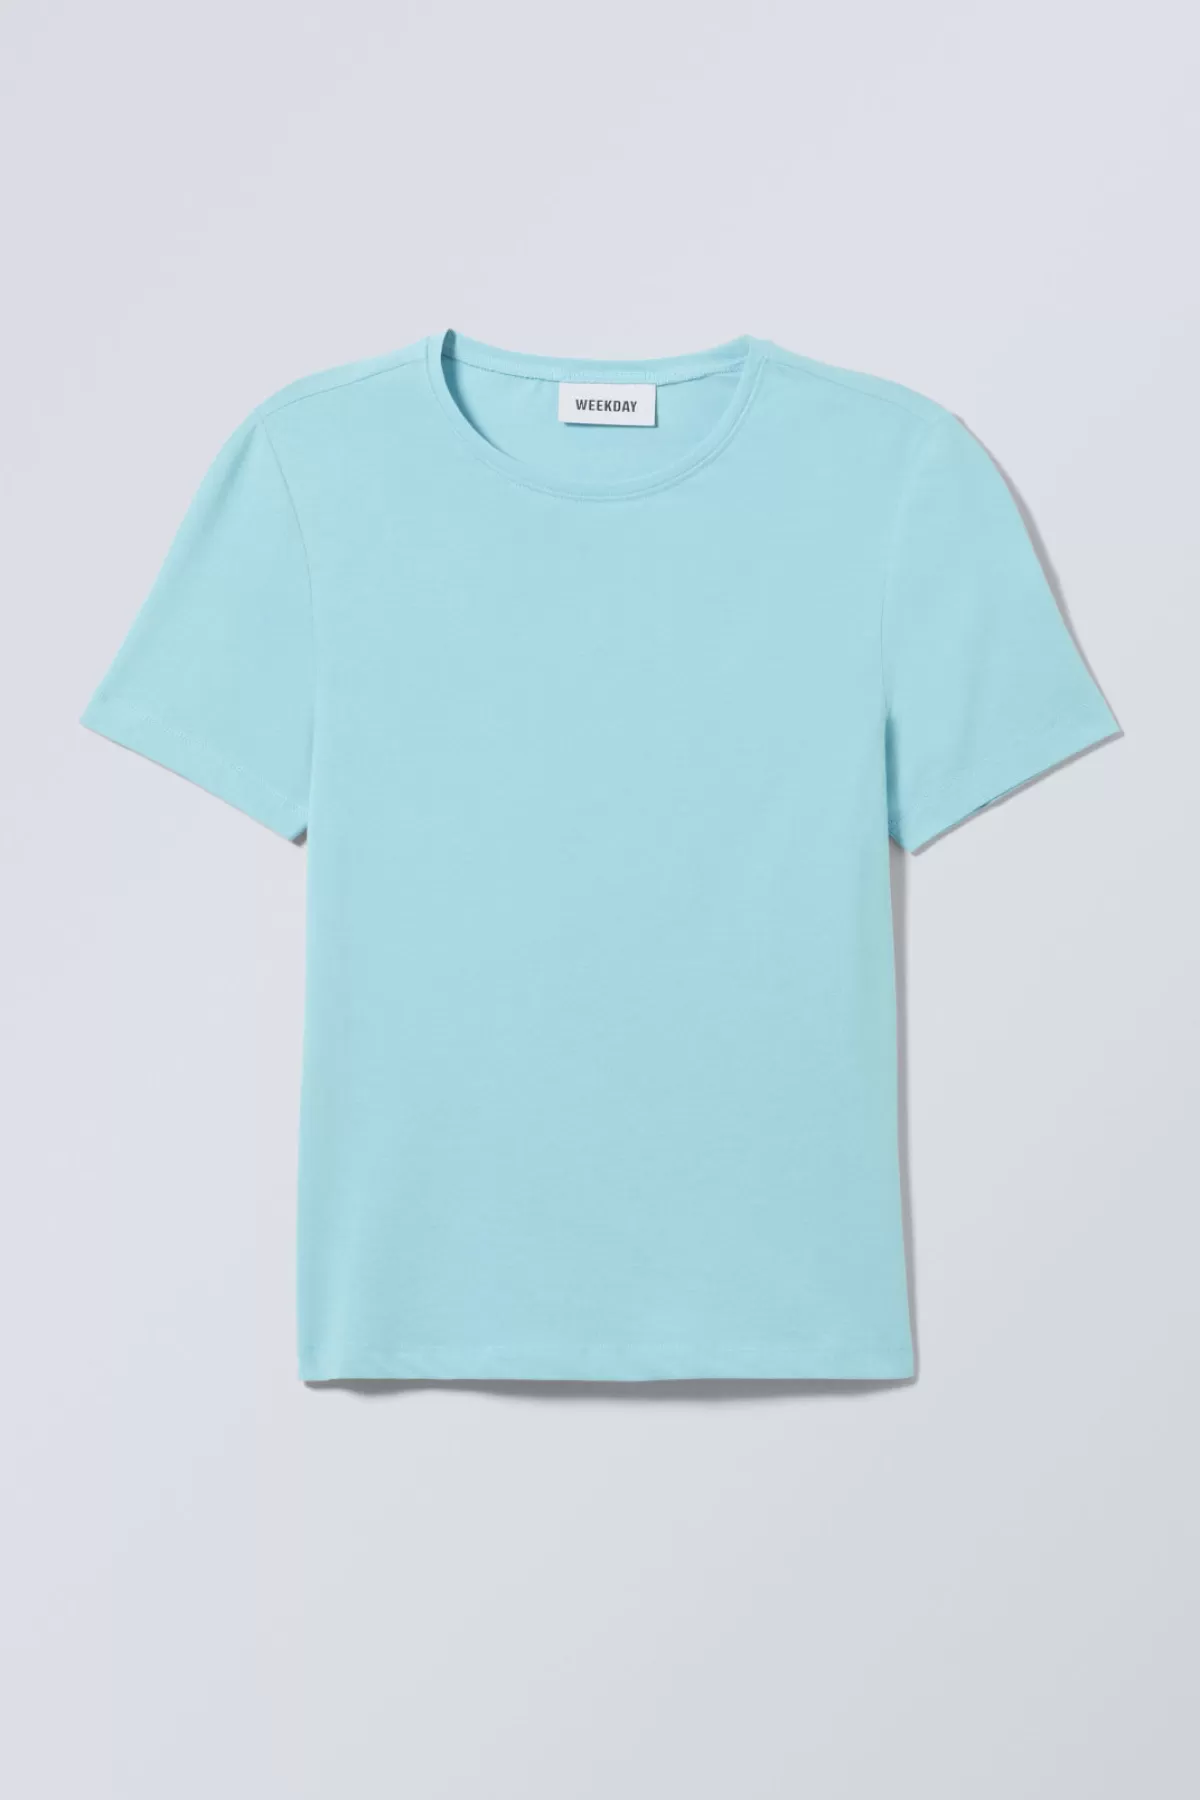 Weekday Slim Fitted T- shirt Flash Sale